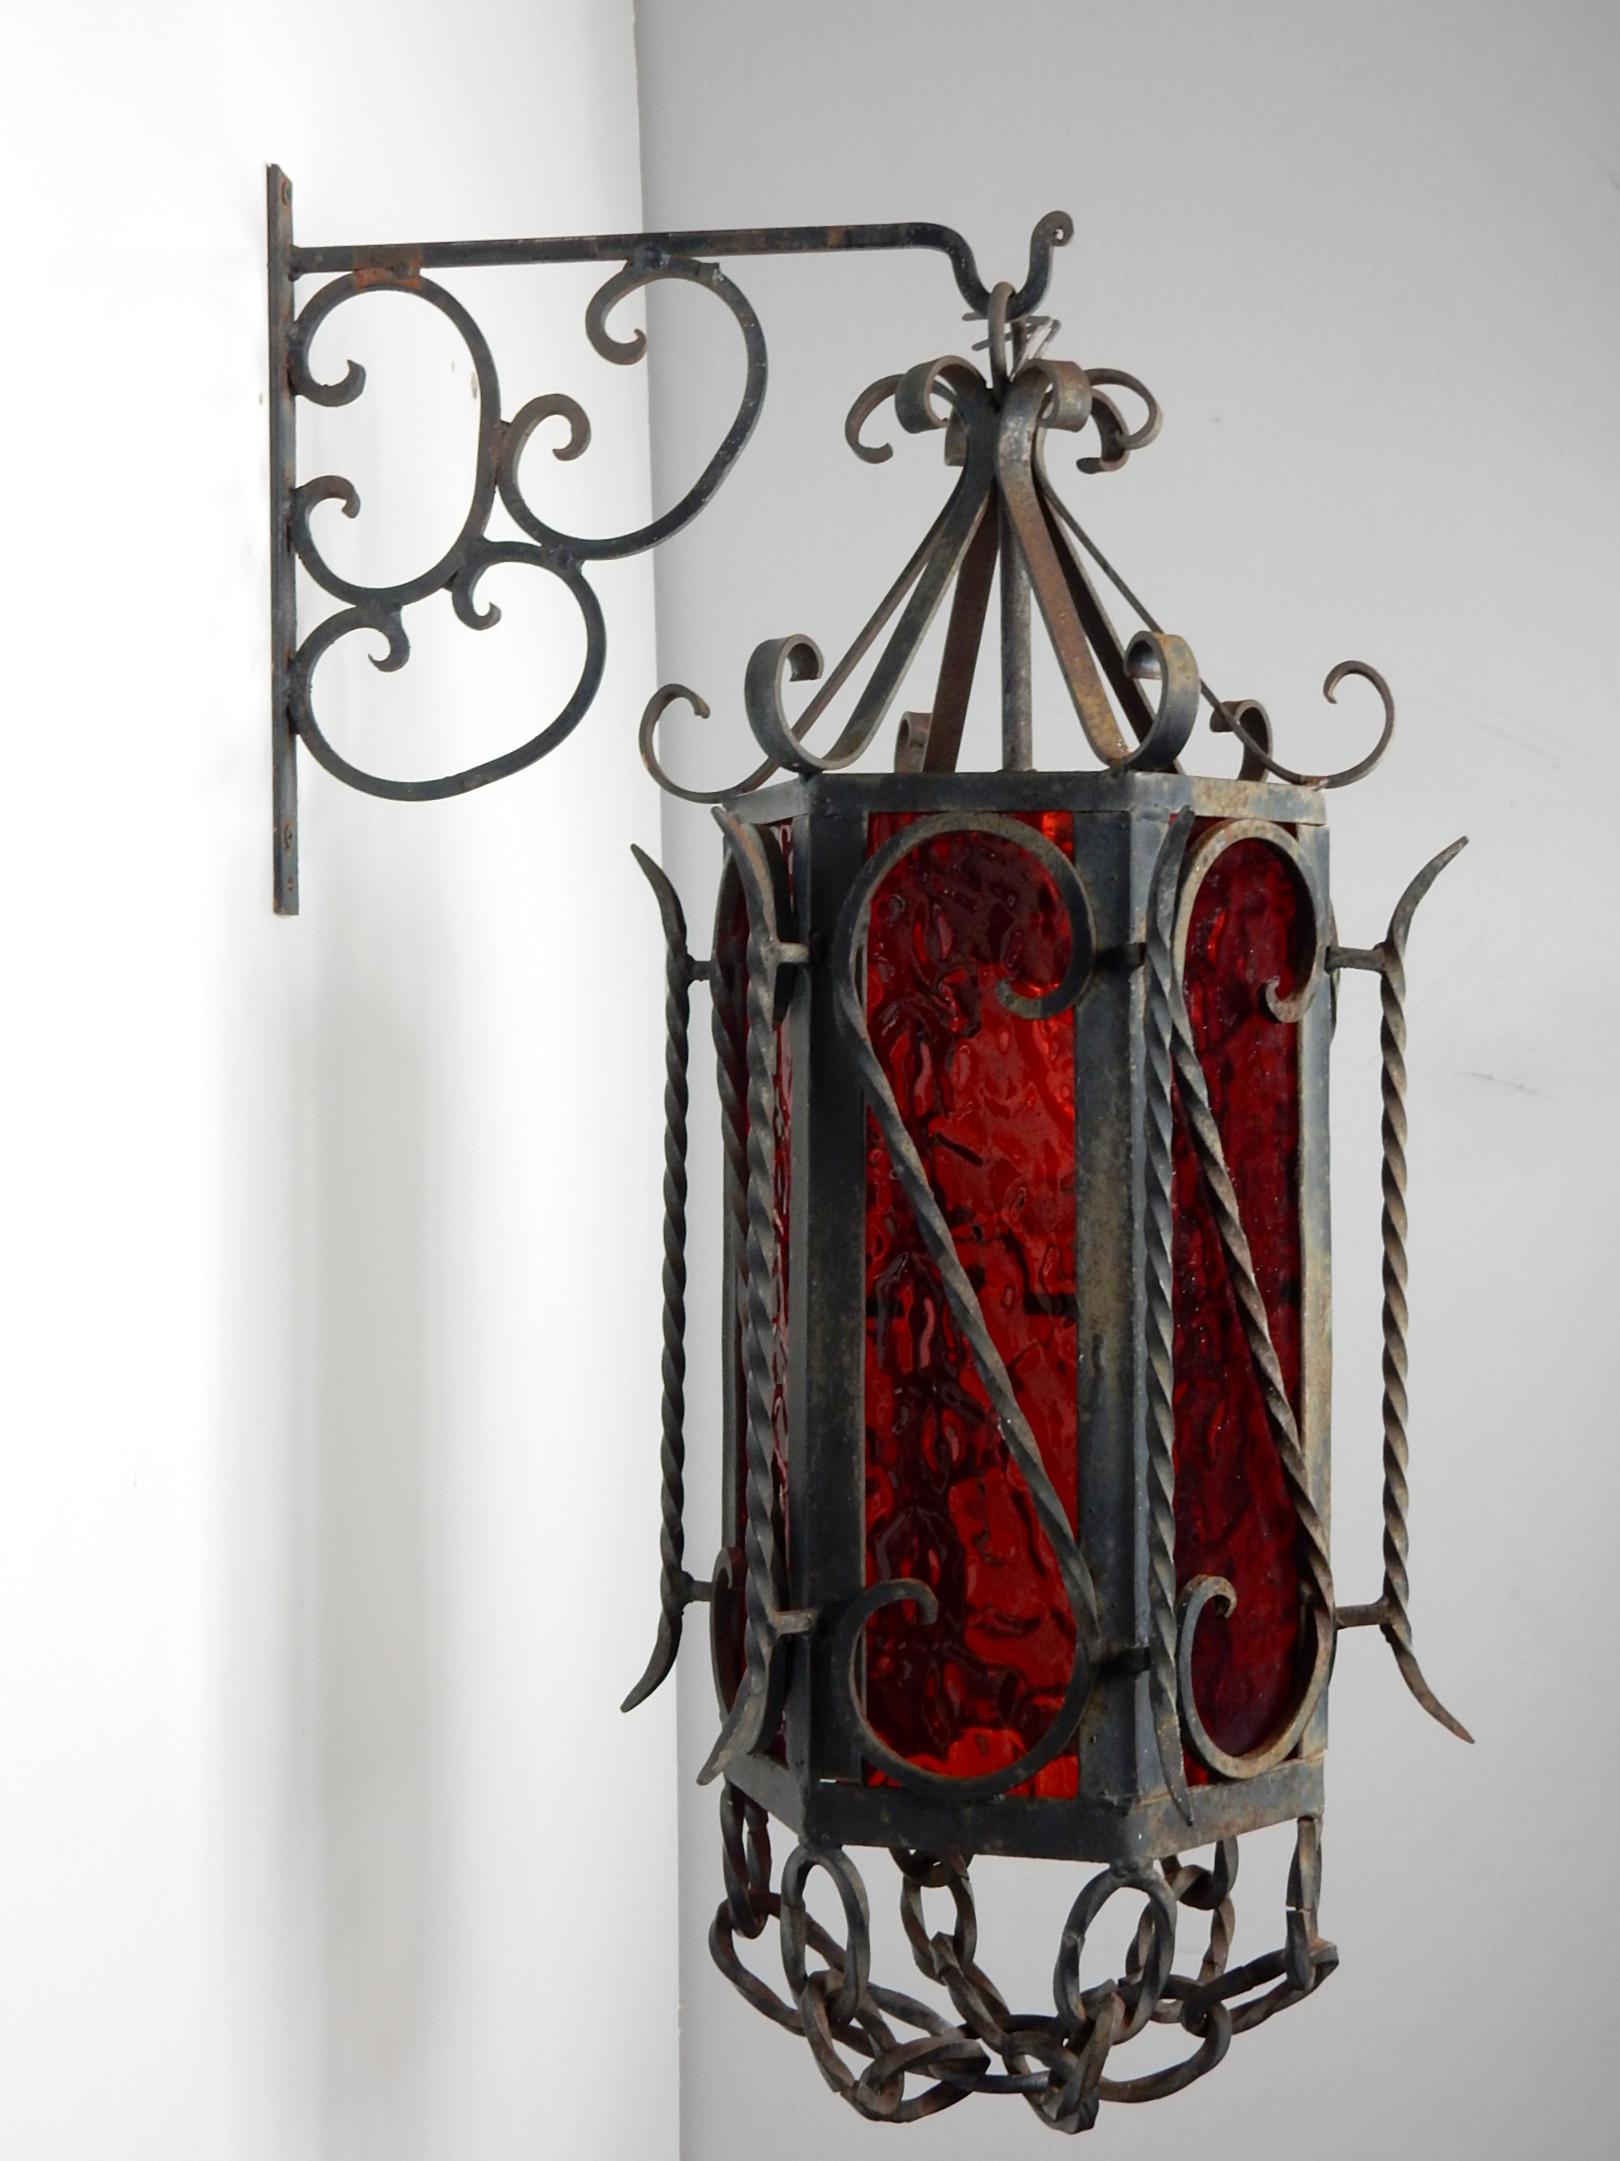 20th Century California Craftsman Iron Ornate Sconces Pendant Lamps with Ruby Red Glass, Pair For Sale